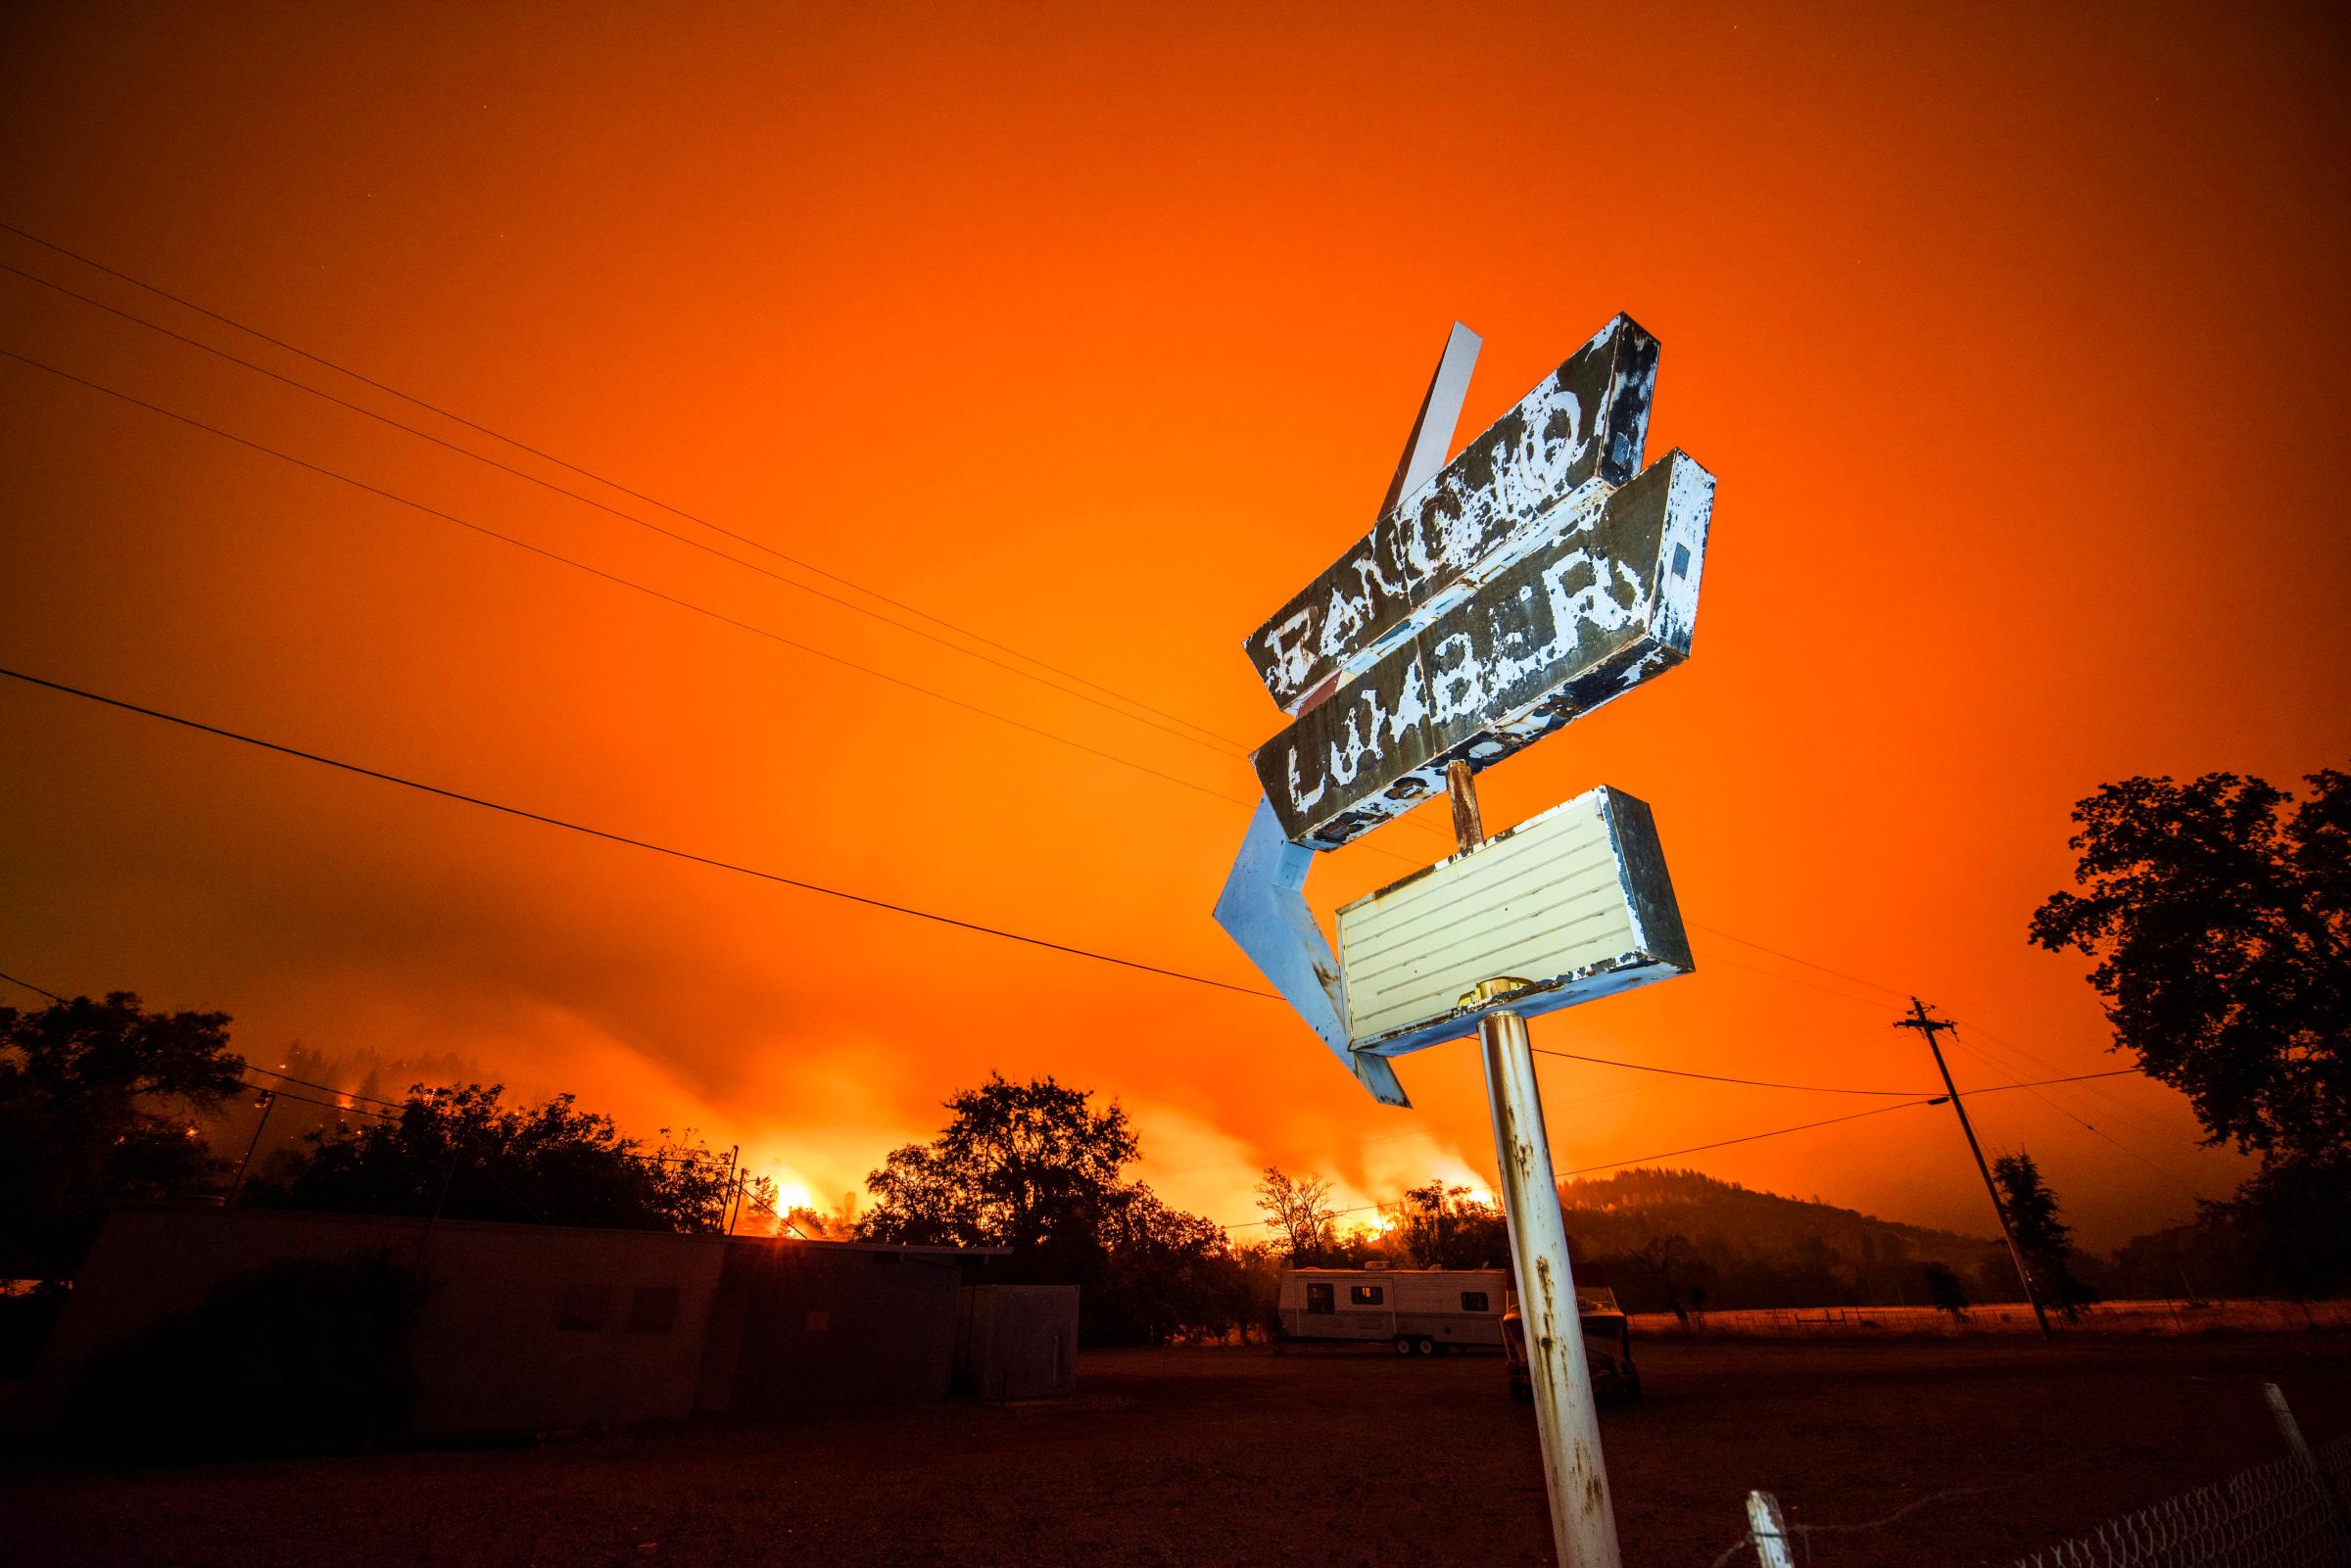 The Valley Fire burns off Highway 29 south of Middletown, CA, Sunday evening Sept. 13, 2015. Valley Fire in Lake and Sonoma Counties Sunday September 13th, 2015. As of Sunday evening the fire had burned over 50,000 acres and was 0% contained. The Associated Press reported that at least one person was killed due to the fire.